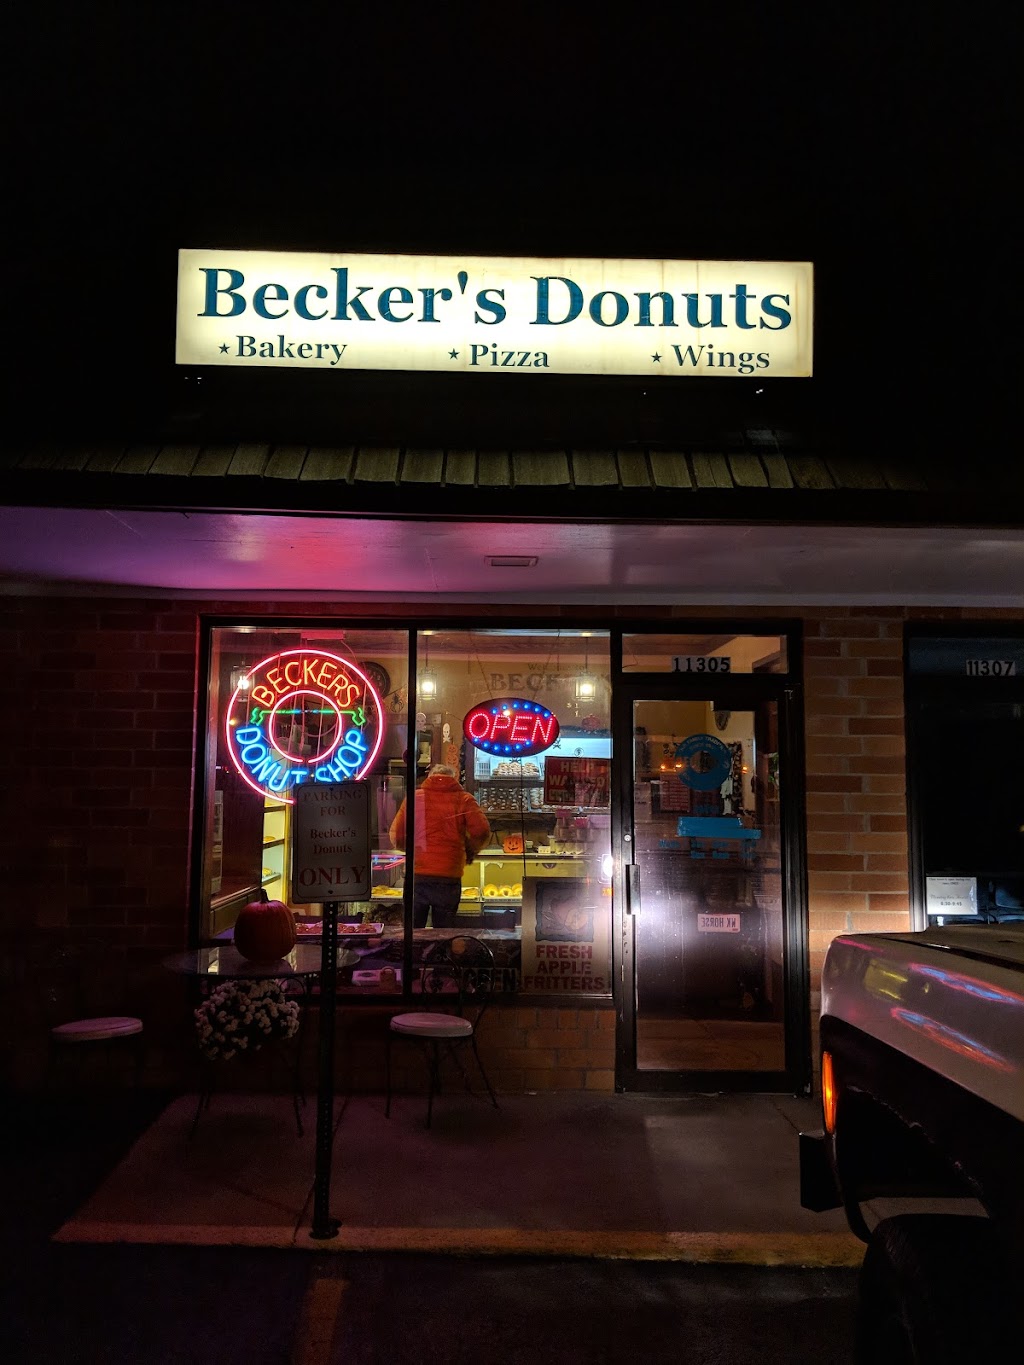 Beckers Donuts | 11305 State Rd, North Royalton, OH 44133, USA | Phone: (440) 237-3700